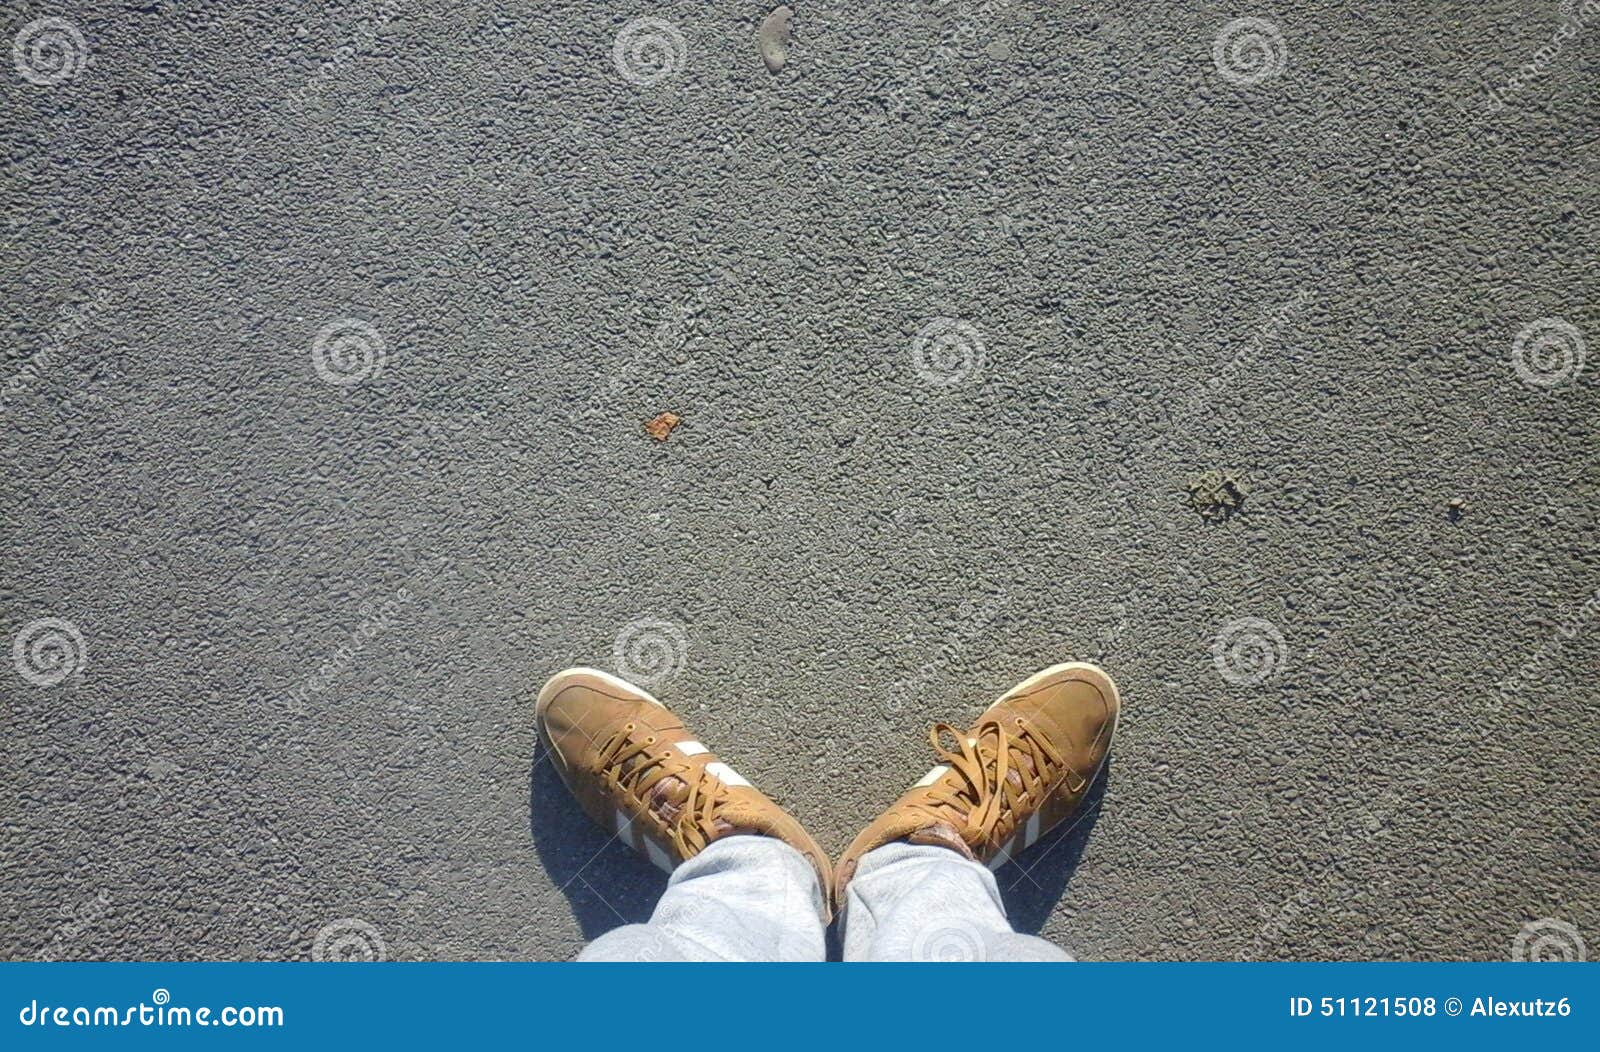 Shoes On The Ground Stock Photo - Image: 51121508